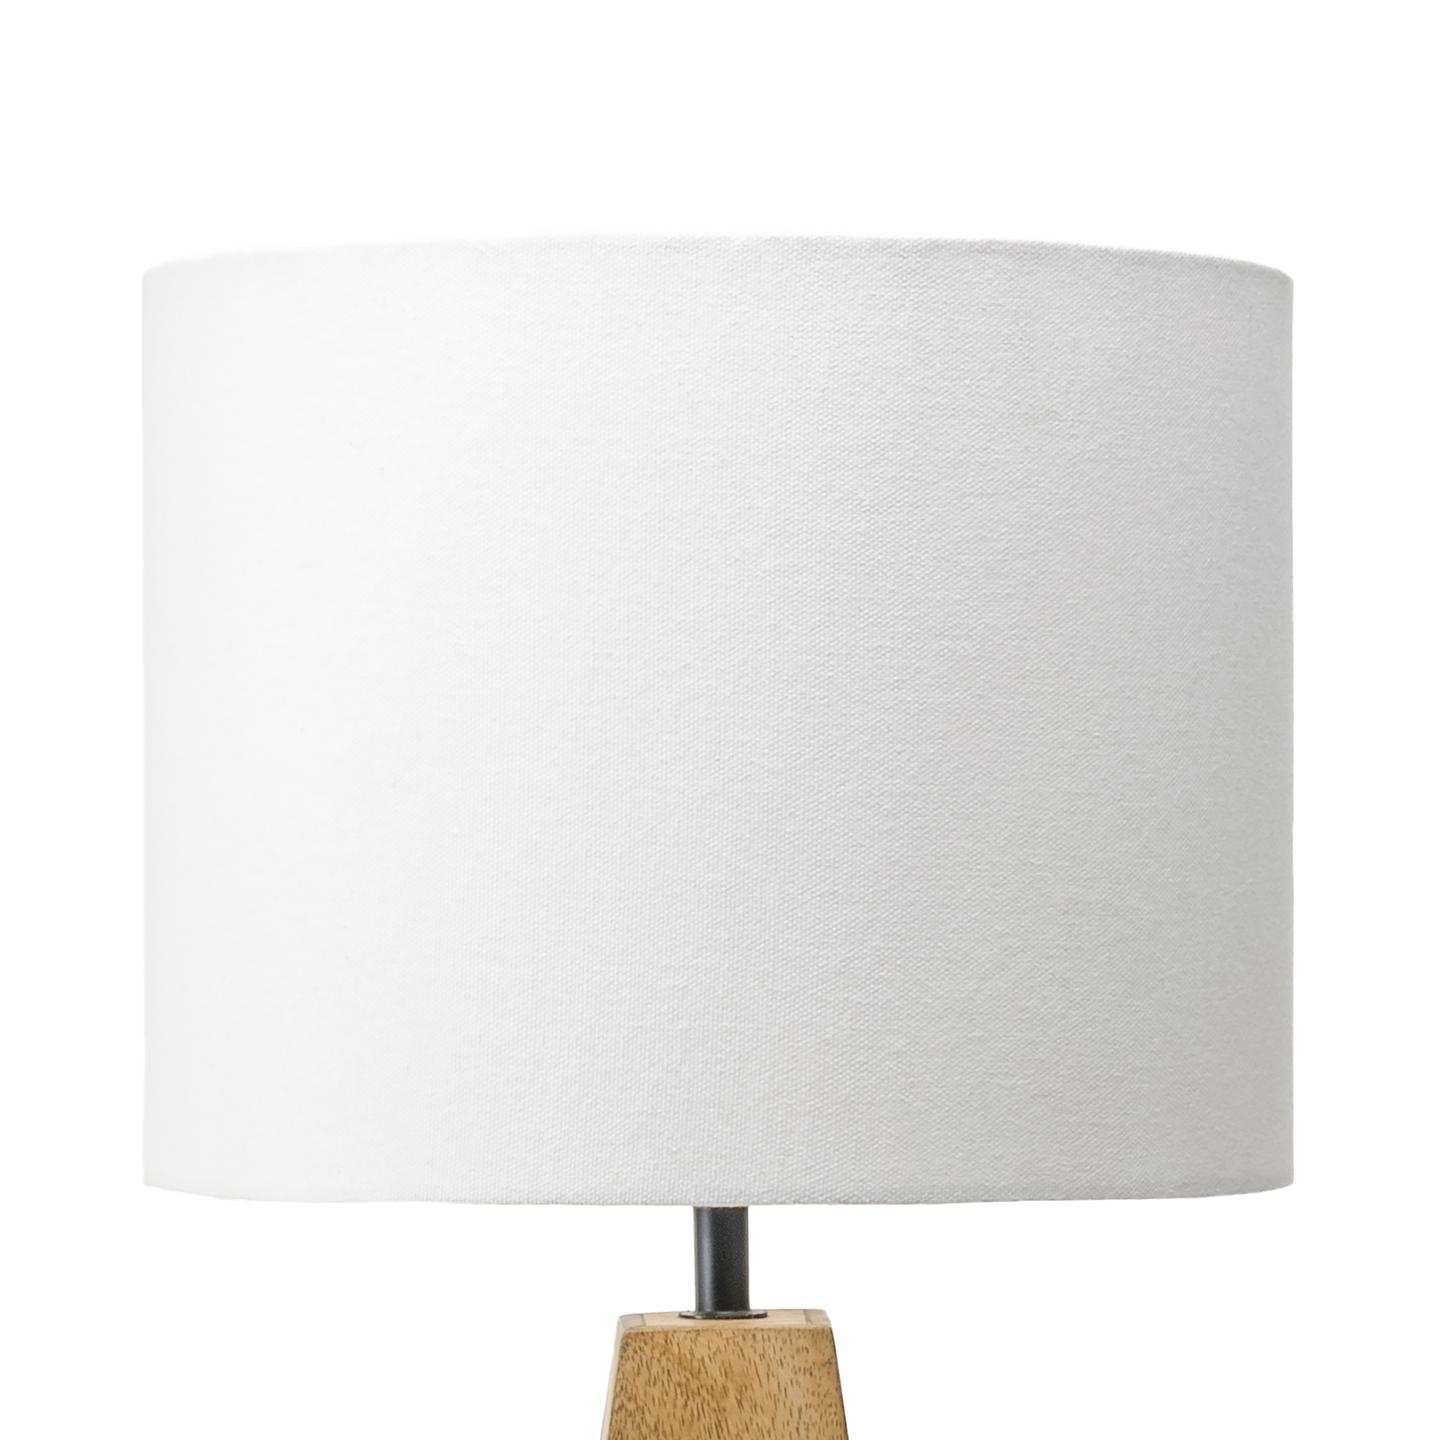 Lily 24" Wood Table Lamp - Image 4